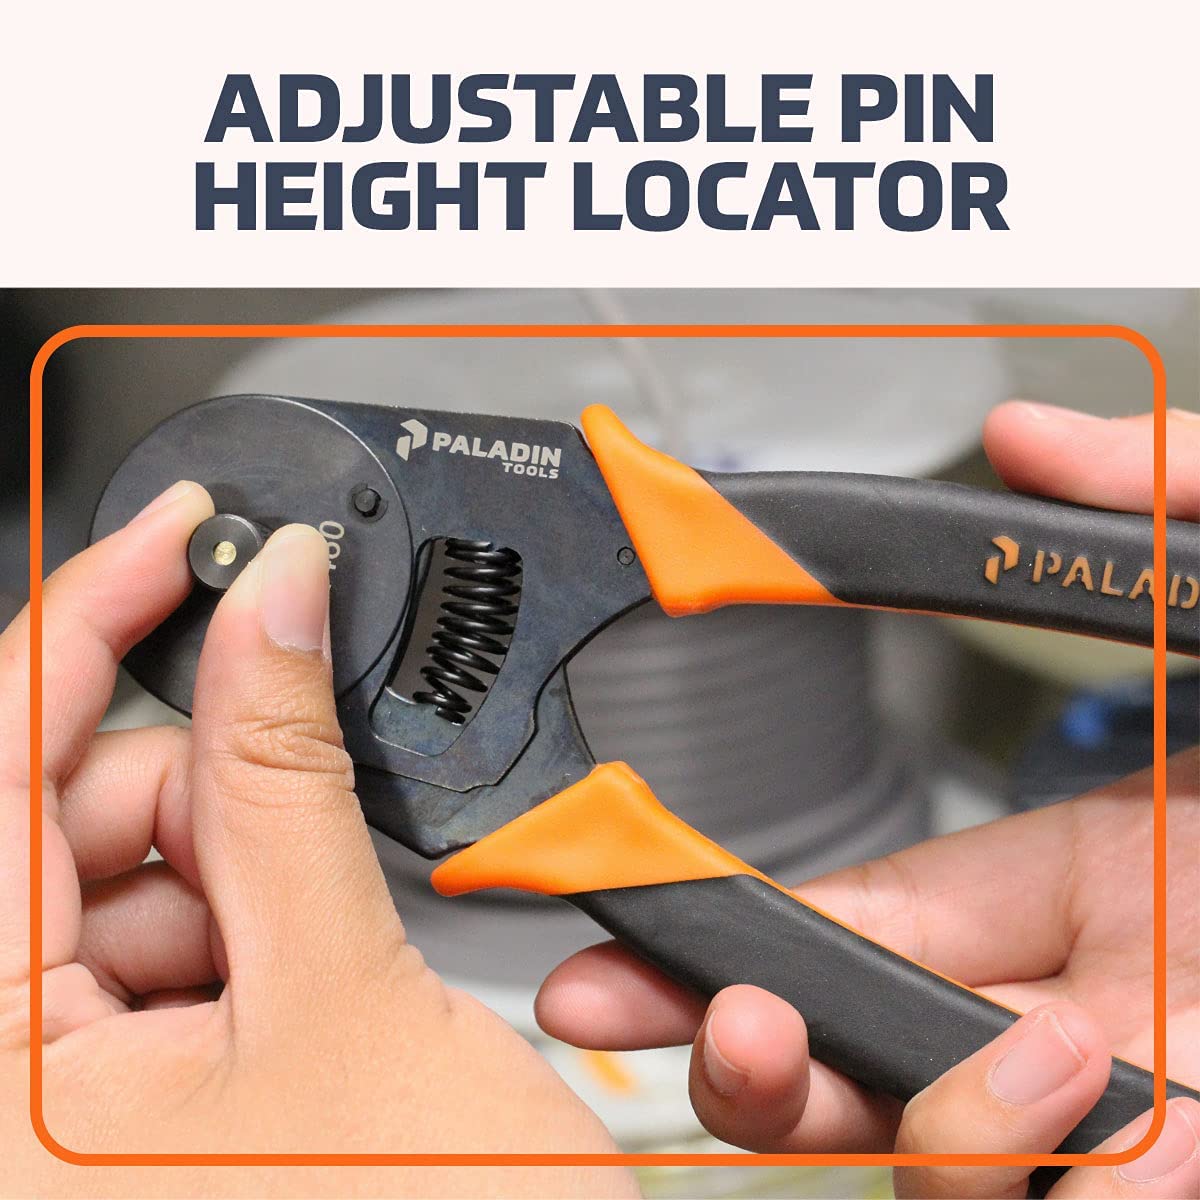 Paladin Tools D-sub 4 Indent Crimping Tool - image 4 of 6